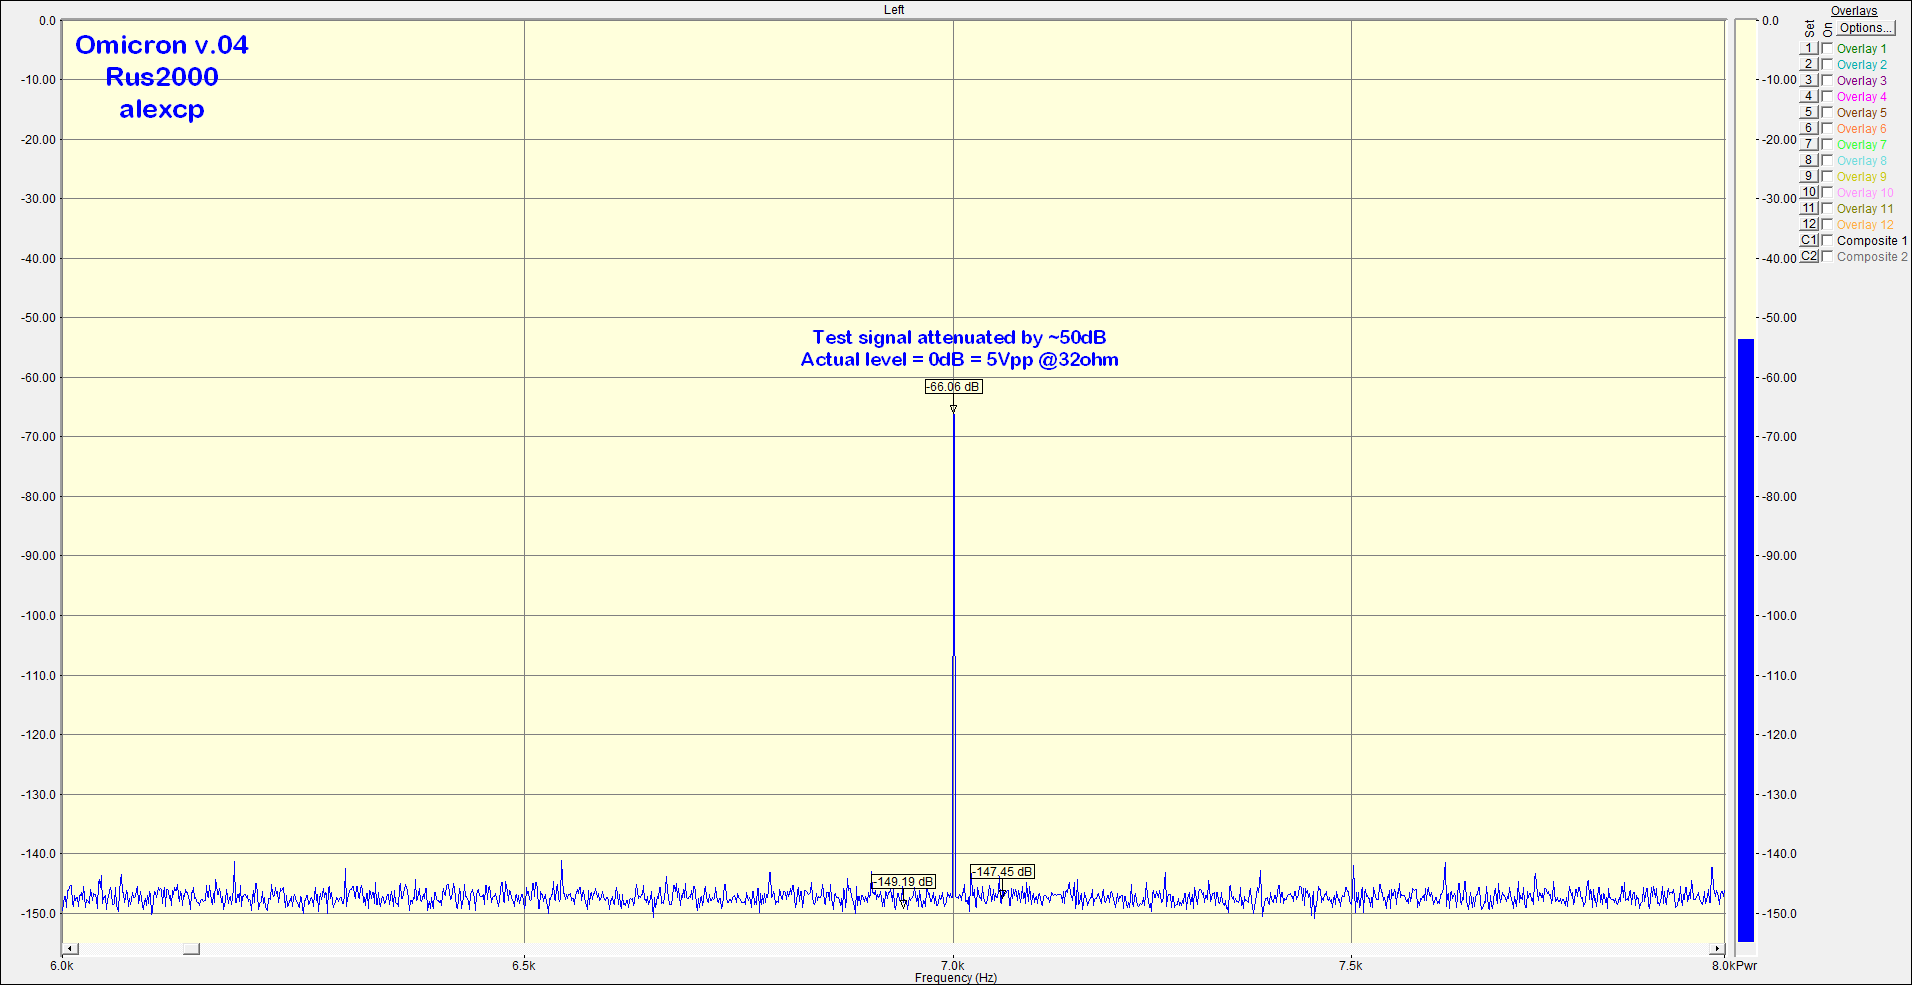 5Vpp 33ohm 60Hz+7kHz annotated.png